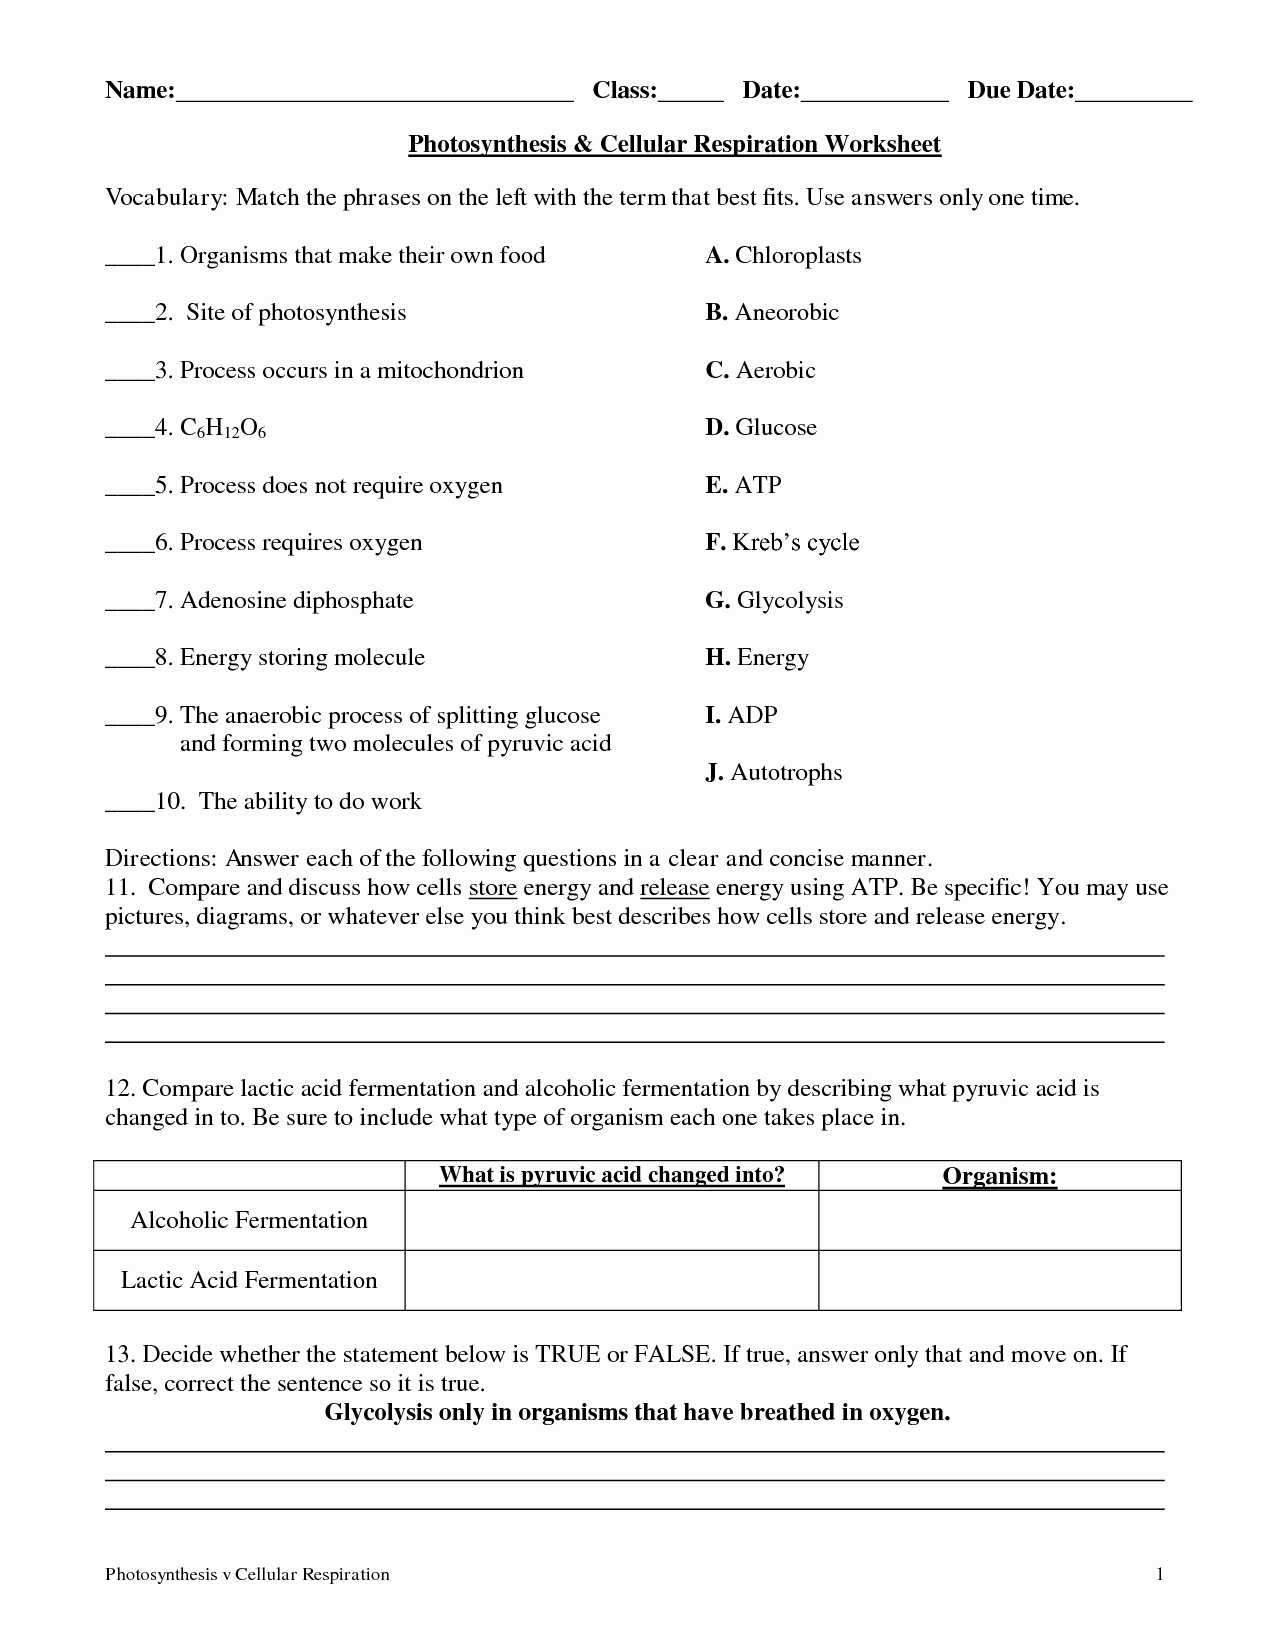 Donald In Mathmagic Land Worksheet Answers and Famous Google Math Answers Vignette Math Worksheets Ideas